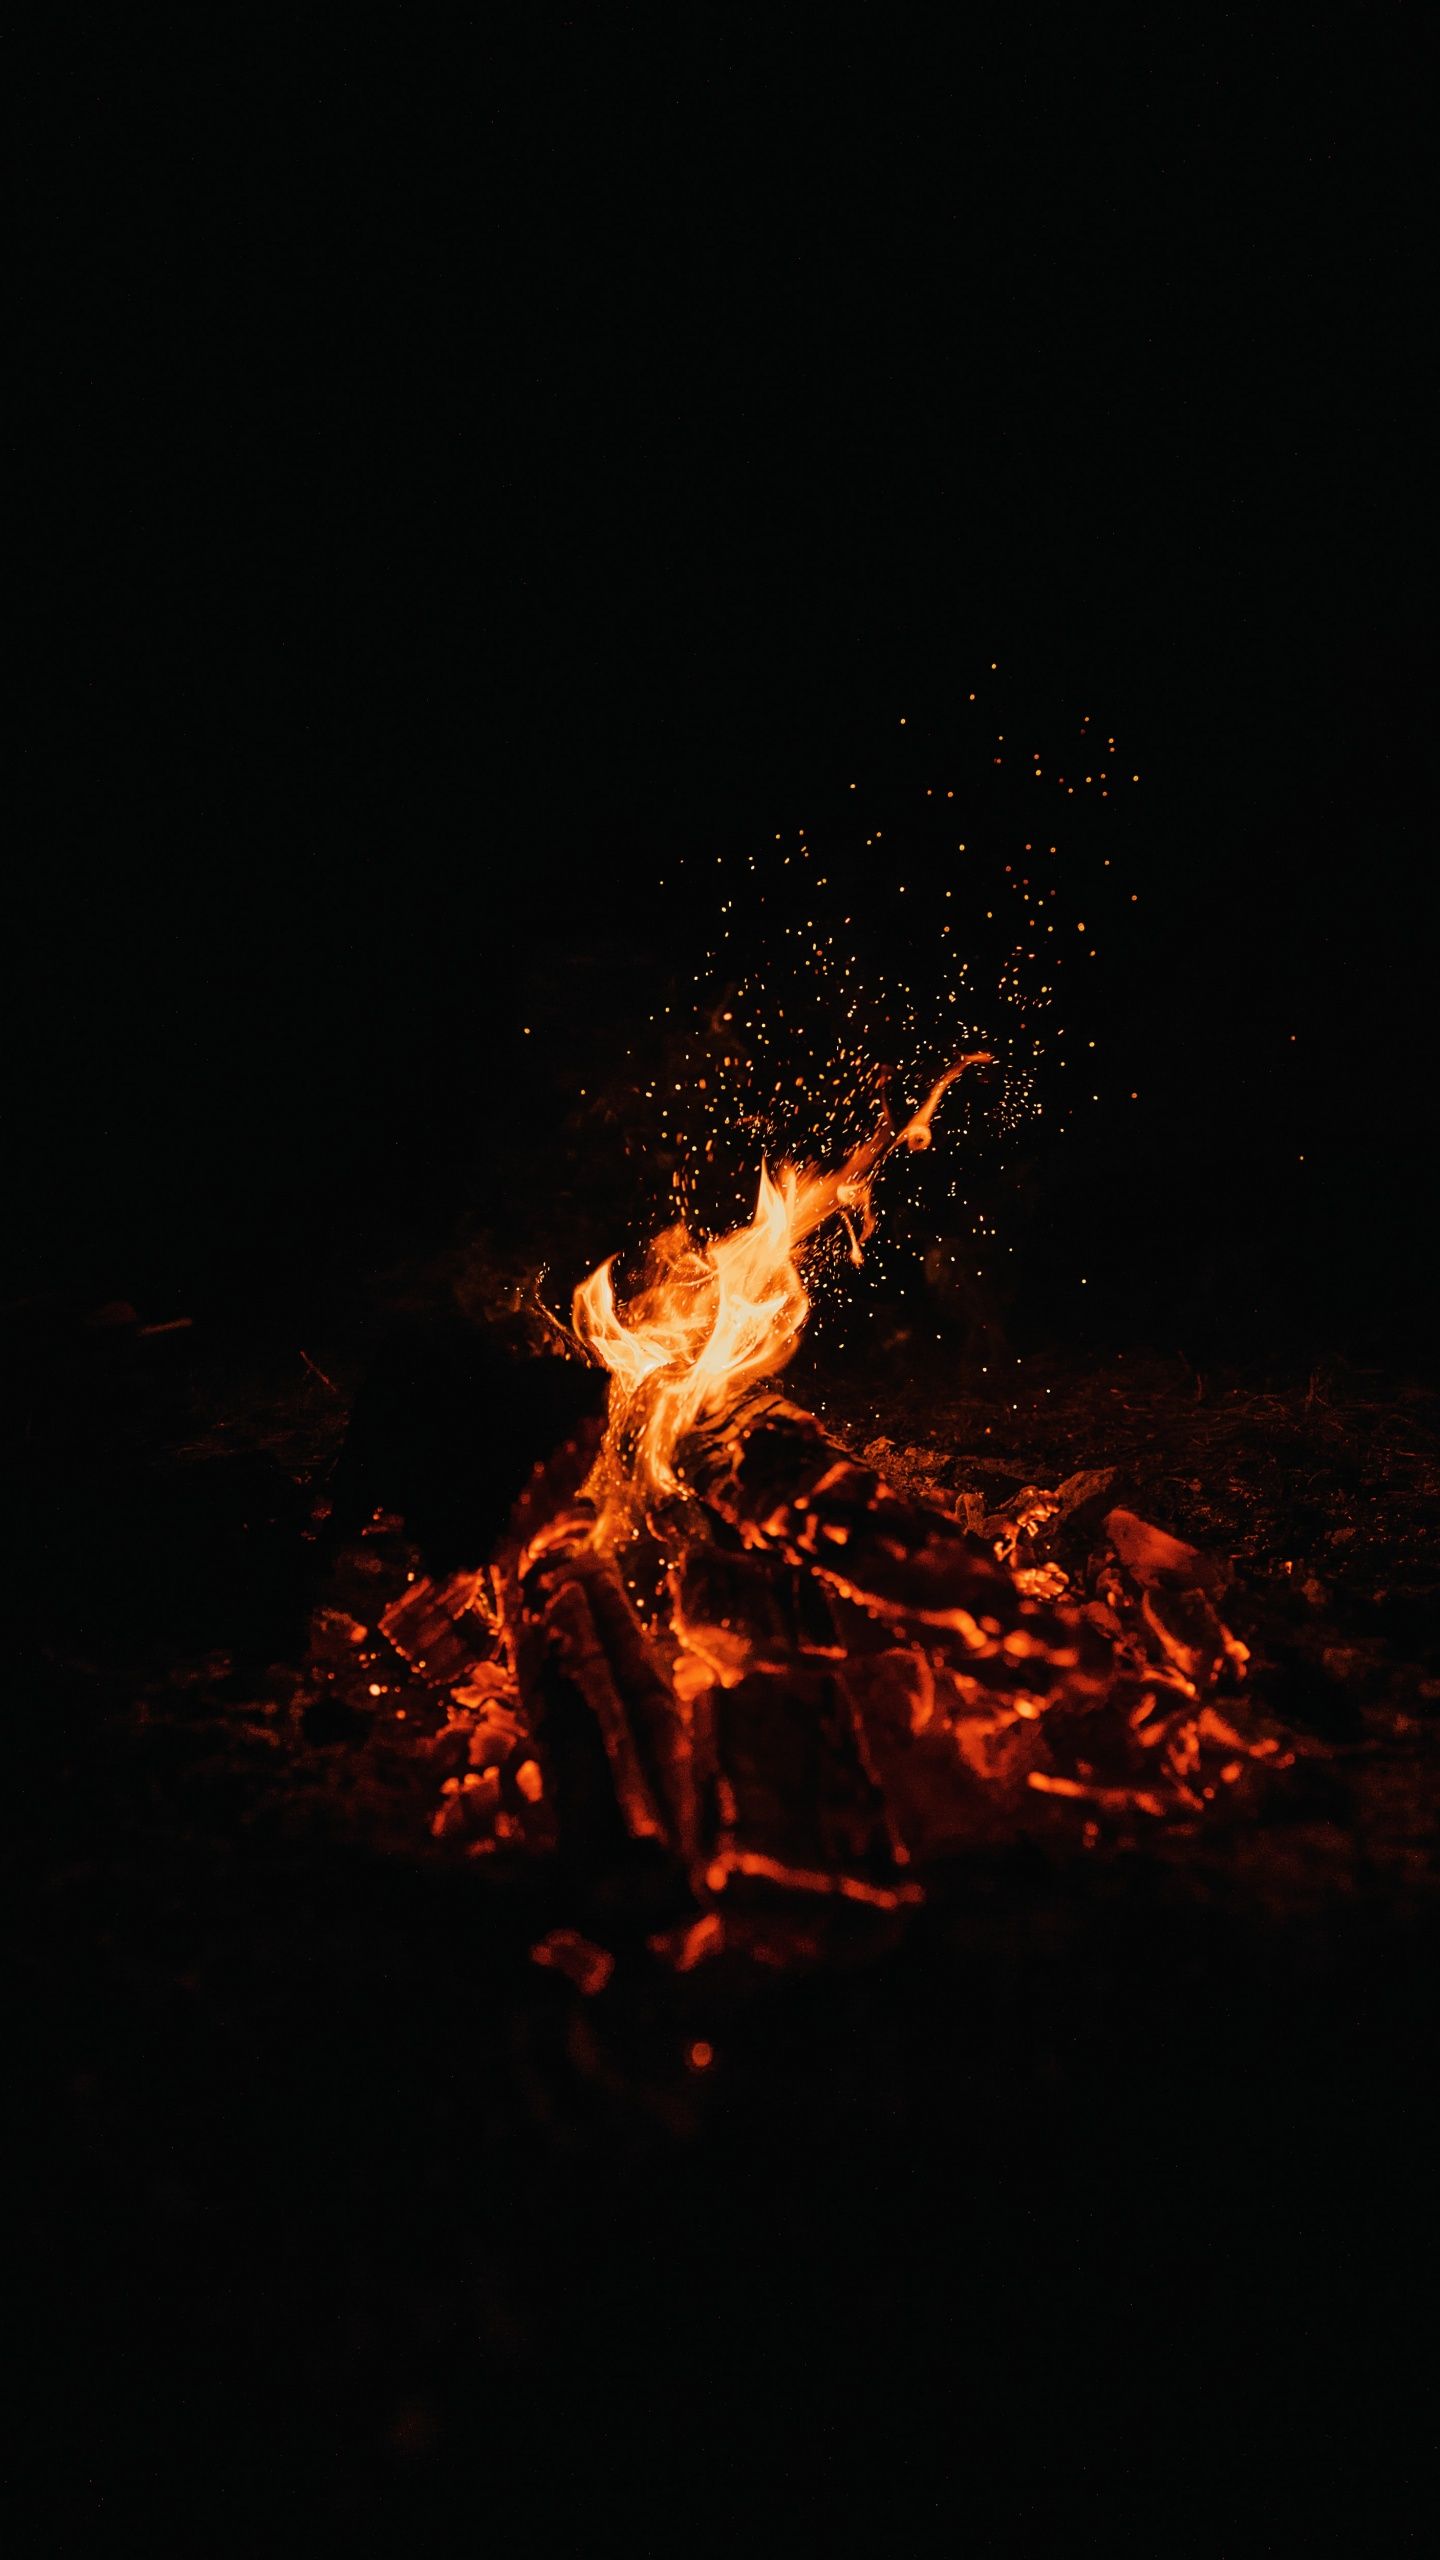 A fire is burning in the dark - Fire